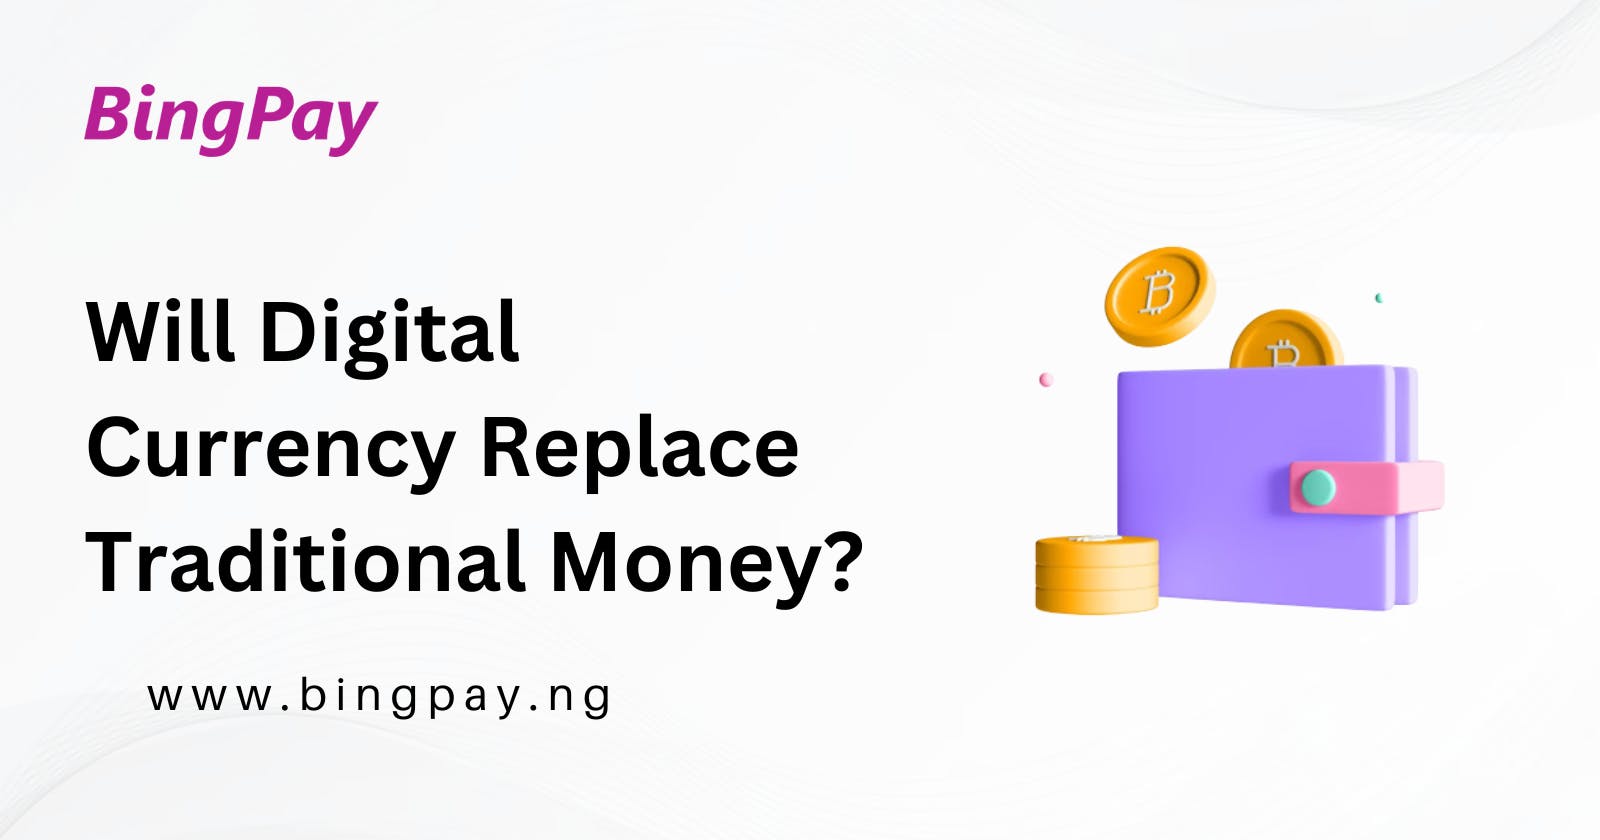 Will Digital Currency Replace Traditional Money?